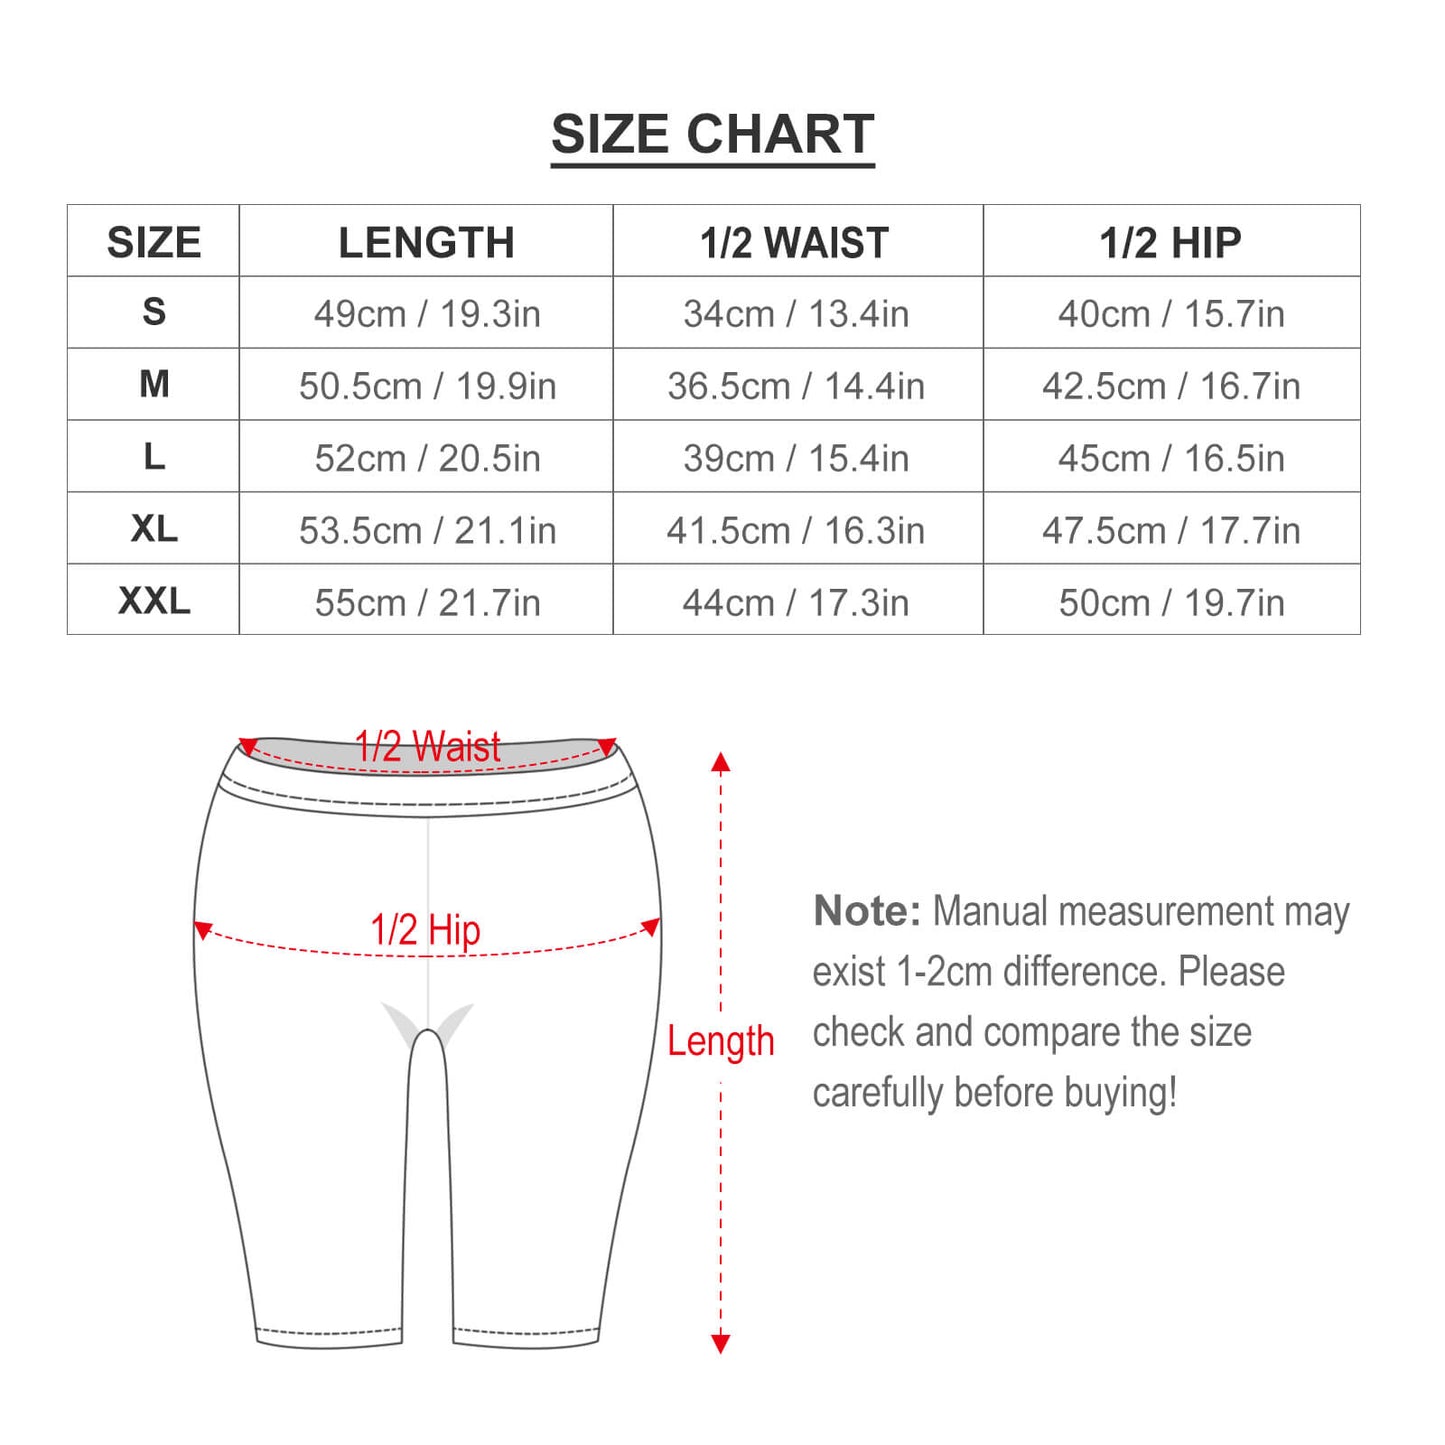 Muppets Chef Wine And Dine Race Women's Knee Length Athletic Yoga Shorts With Pockets